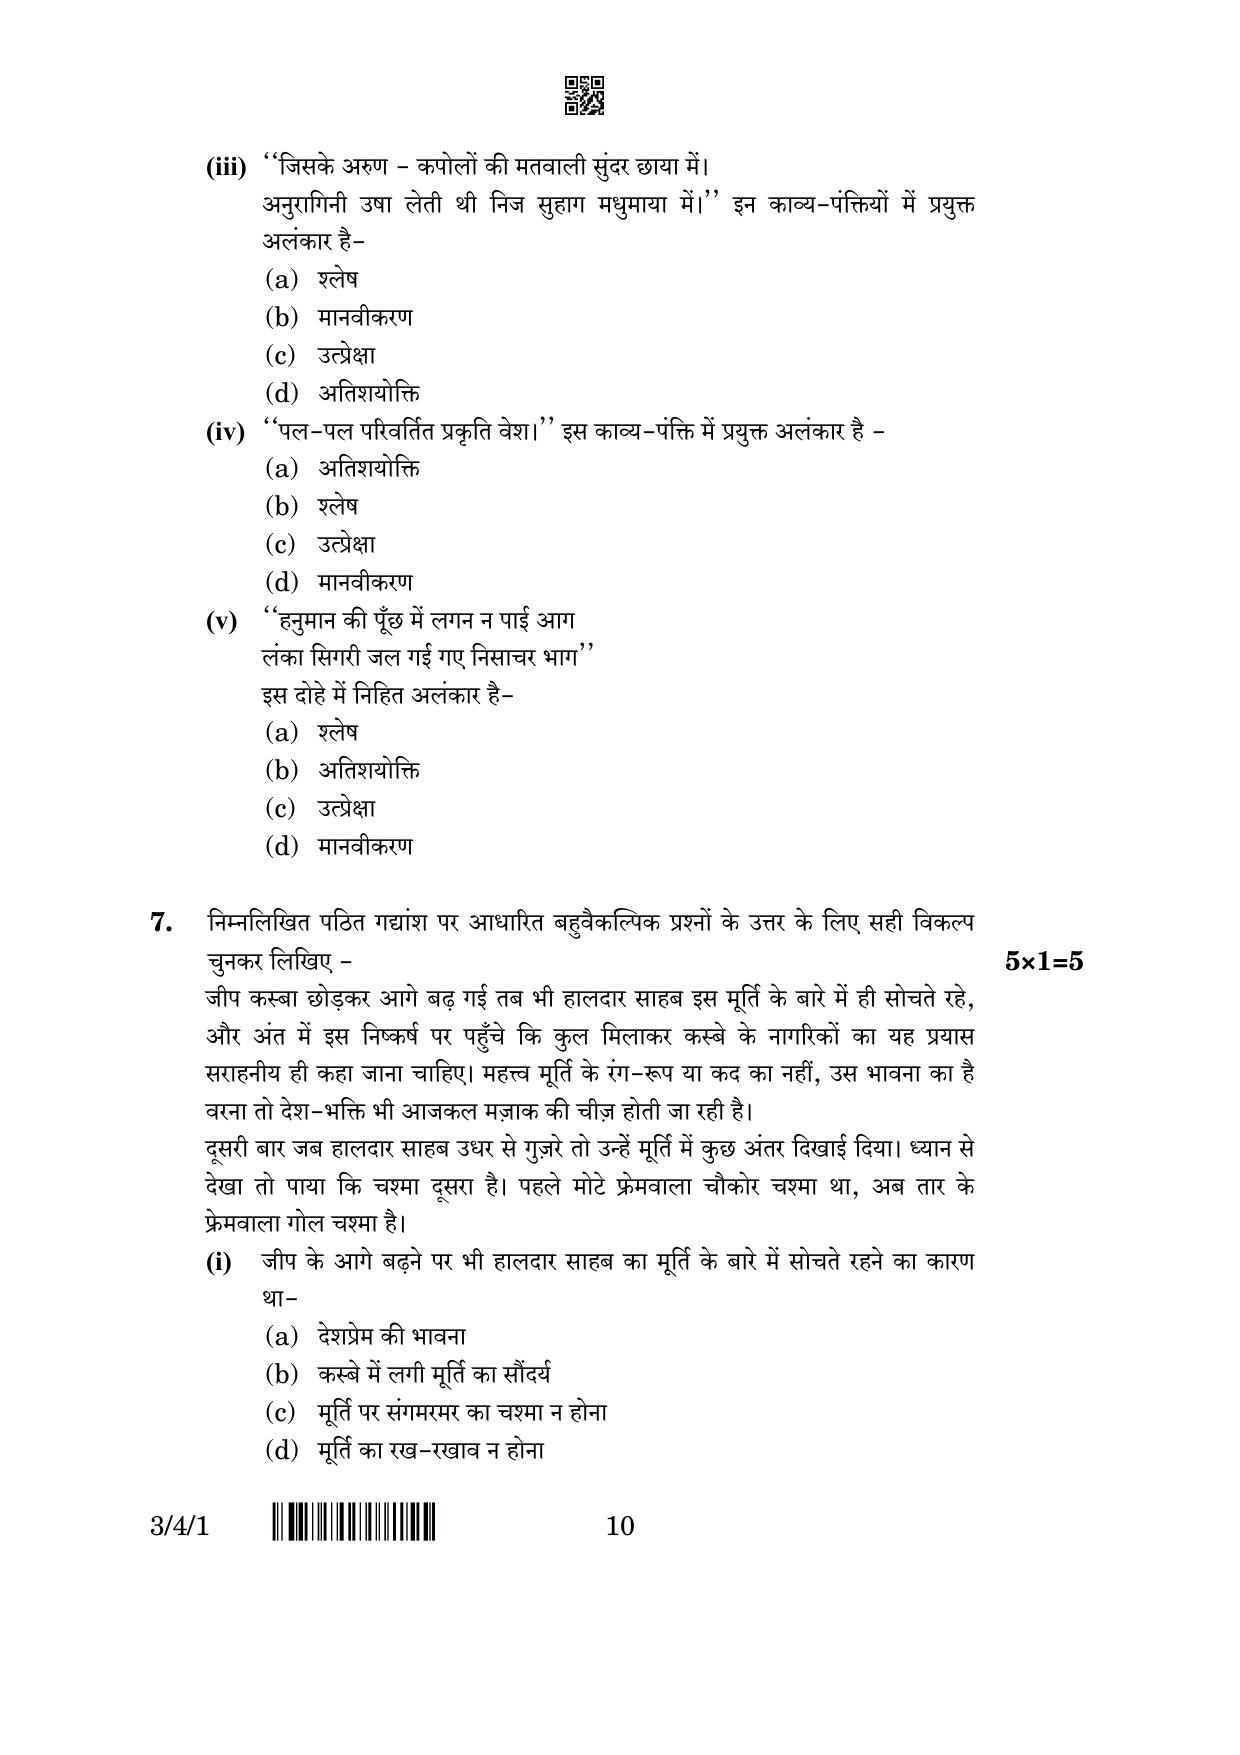 CBSE Class 10 3-4-1 Hindi A 2023 Question Paper - Page 10